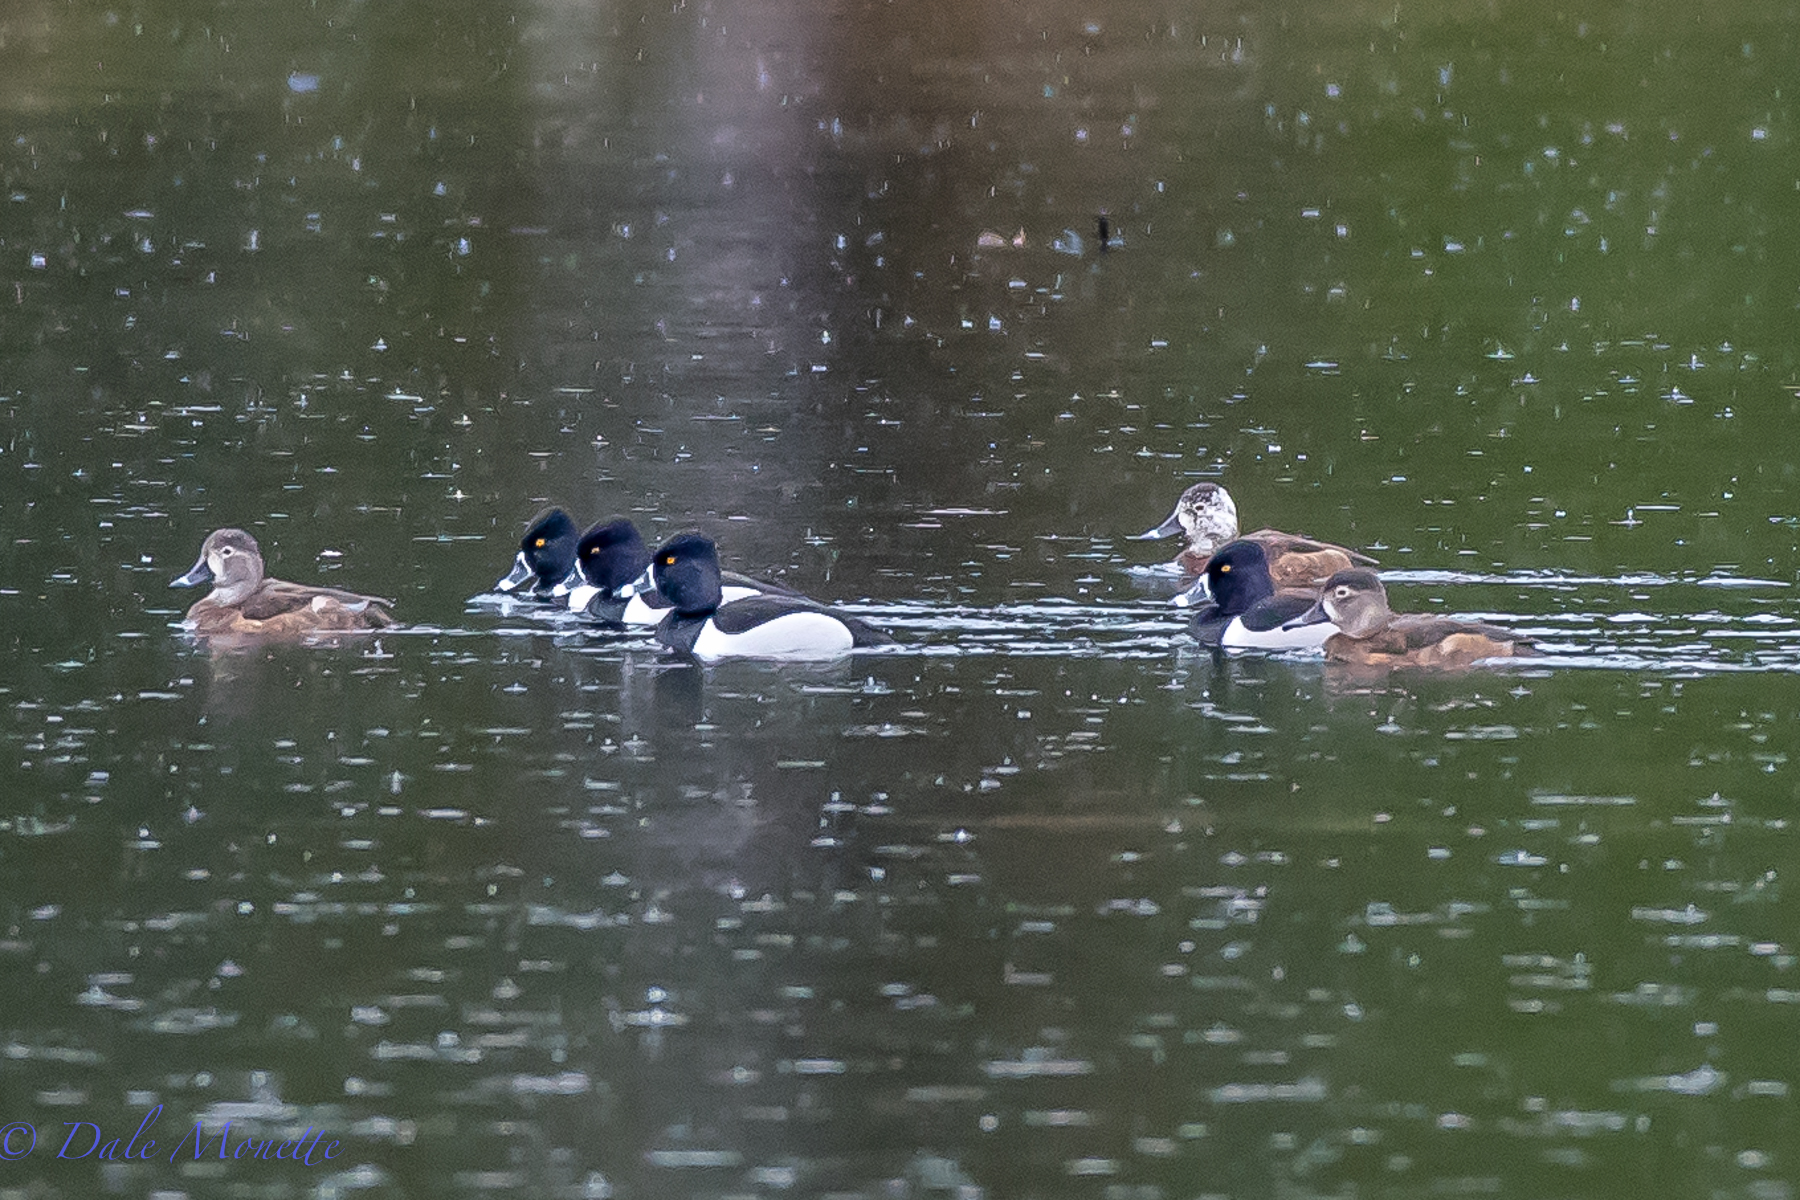   The rain kept me inside for a day and a half. &nbsp;I finally went out and it "rained on my parade" of ring necked ducks ! &nbsp;4/12/16  